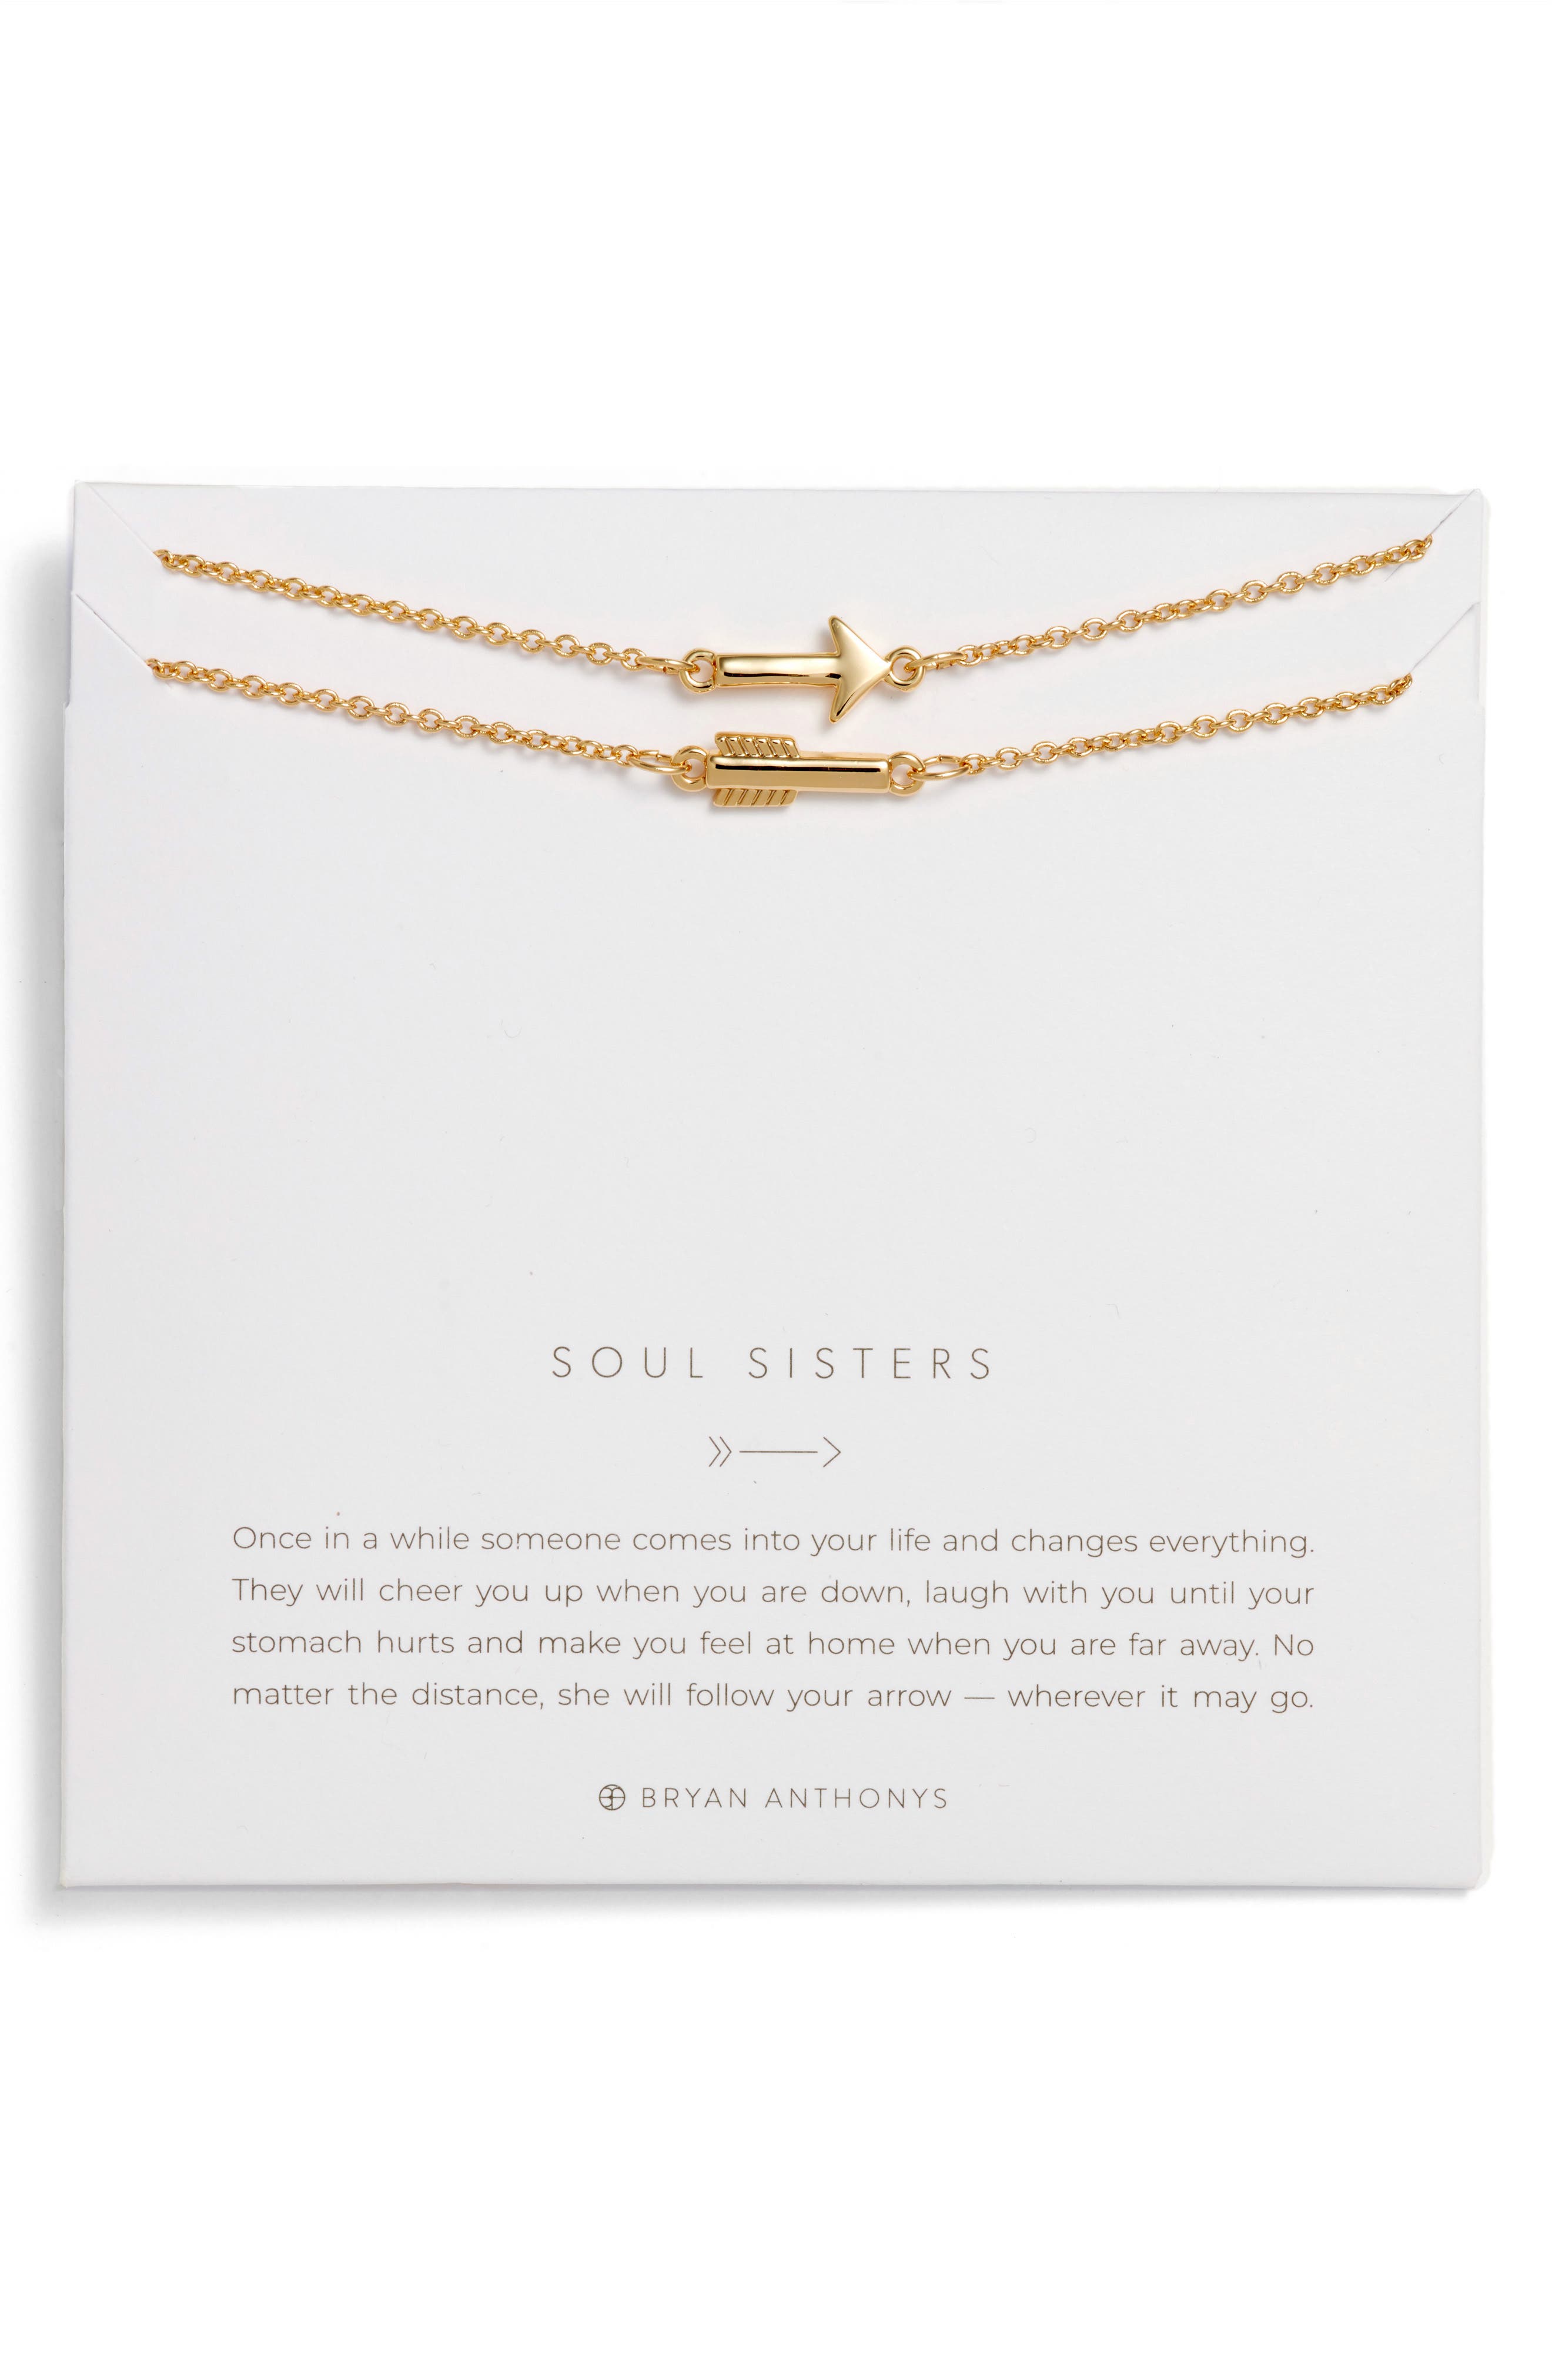 Bryan Anthonys Soul Sisters Set of 2 Arrow Pendant Friendship Necklaces in Gold at Nordstrom